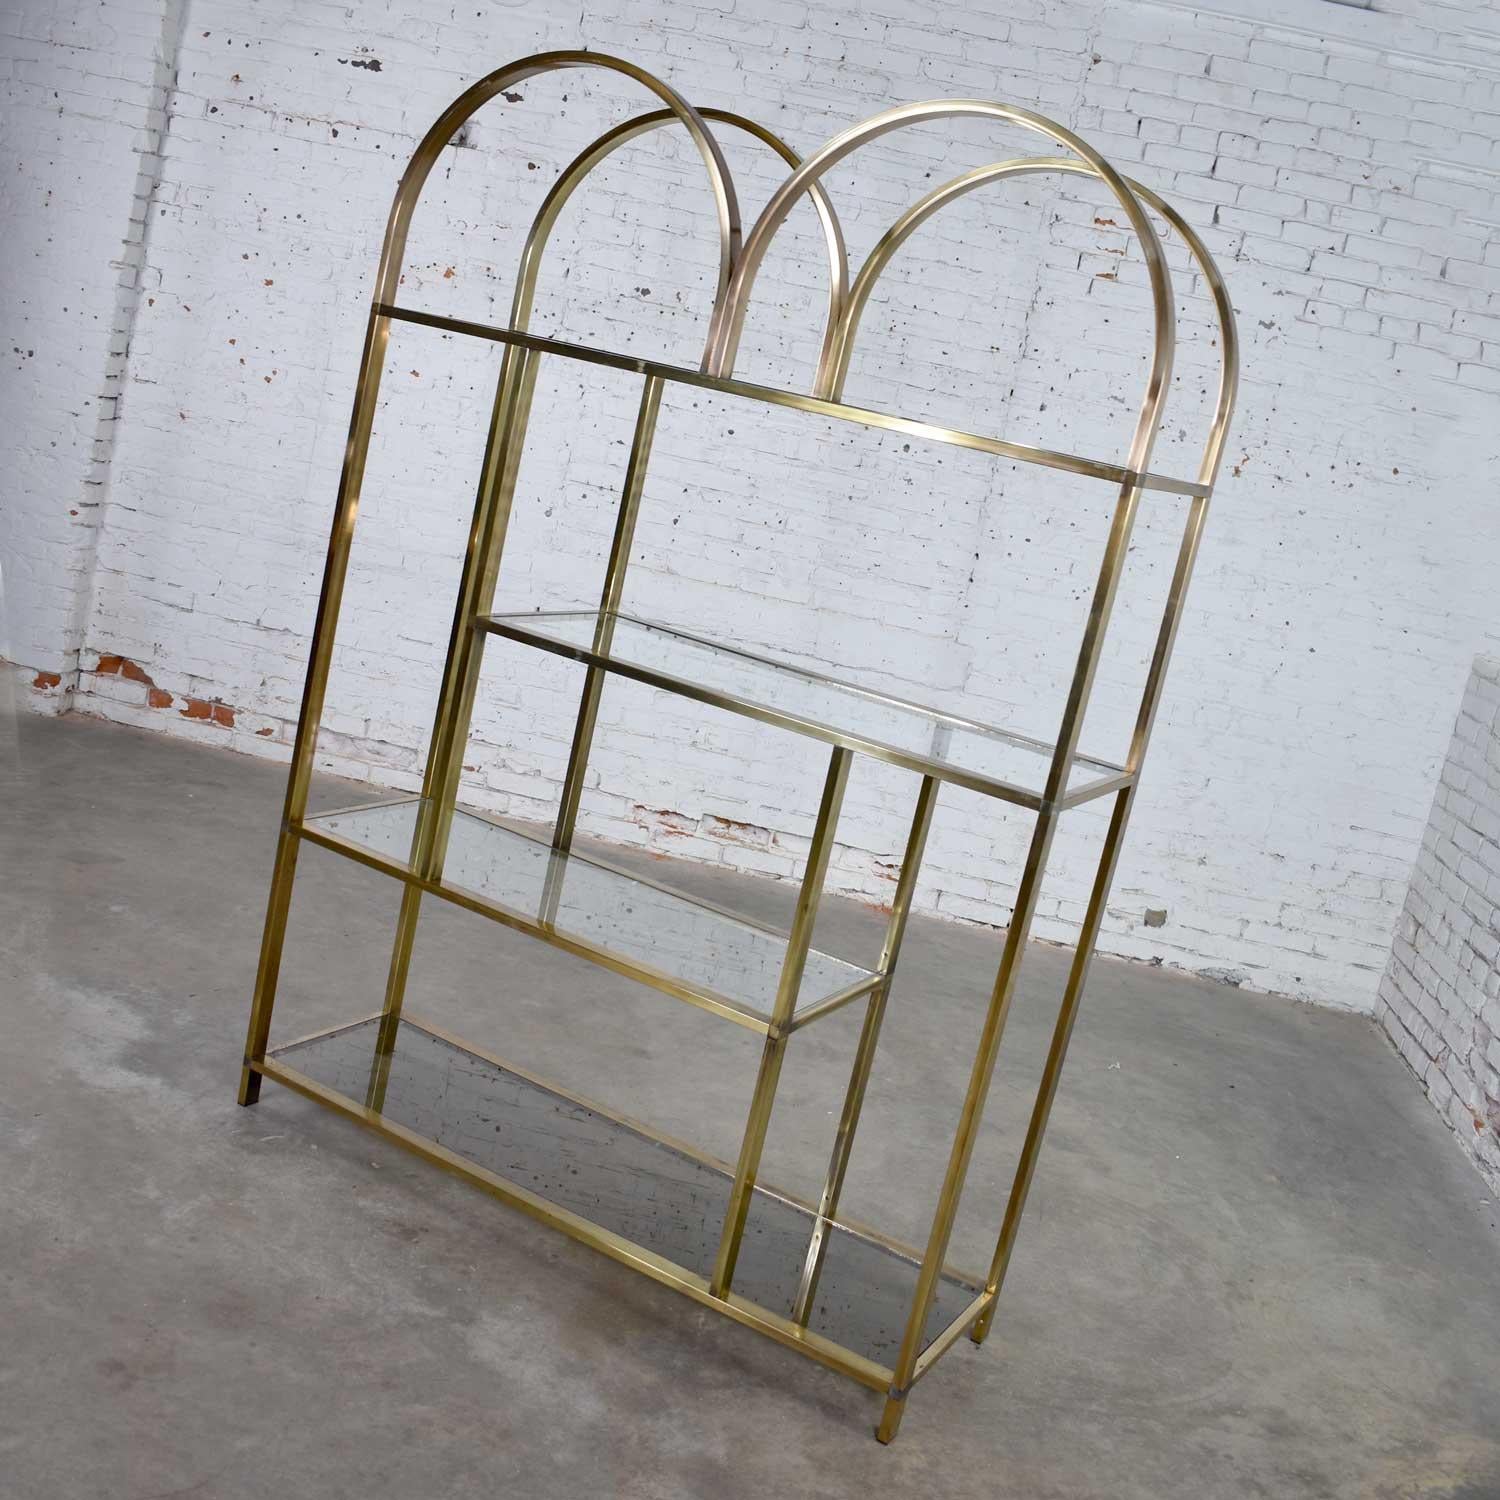 Handsome brass plated chrome modern double arched étagère or display shelves. The bottom shelf is smoked glass and the others are clear. It is in wonderful vintage condition. The brass plating is distressed and worn in several places giving a very